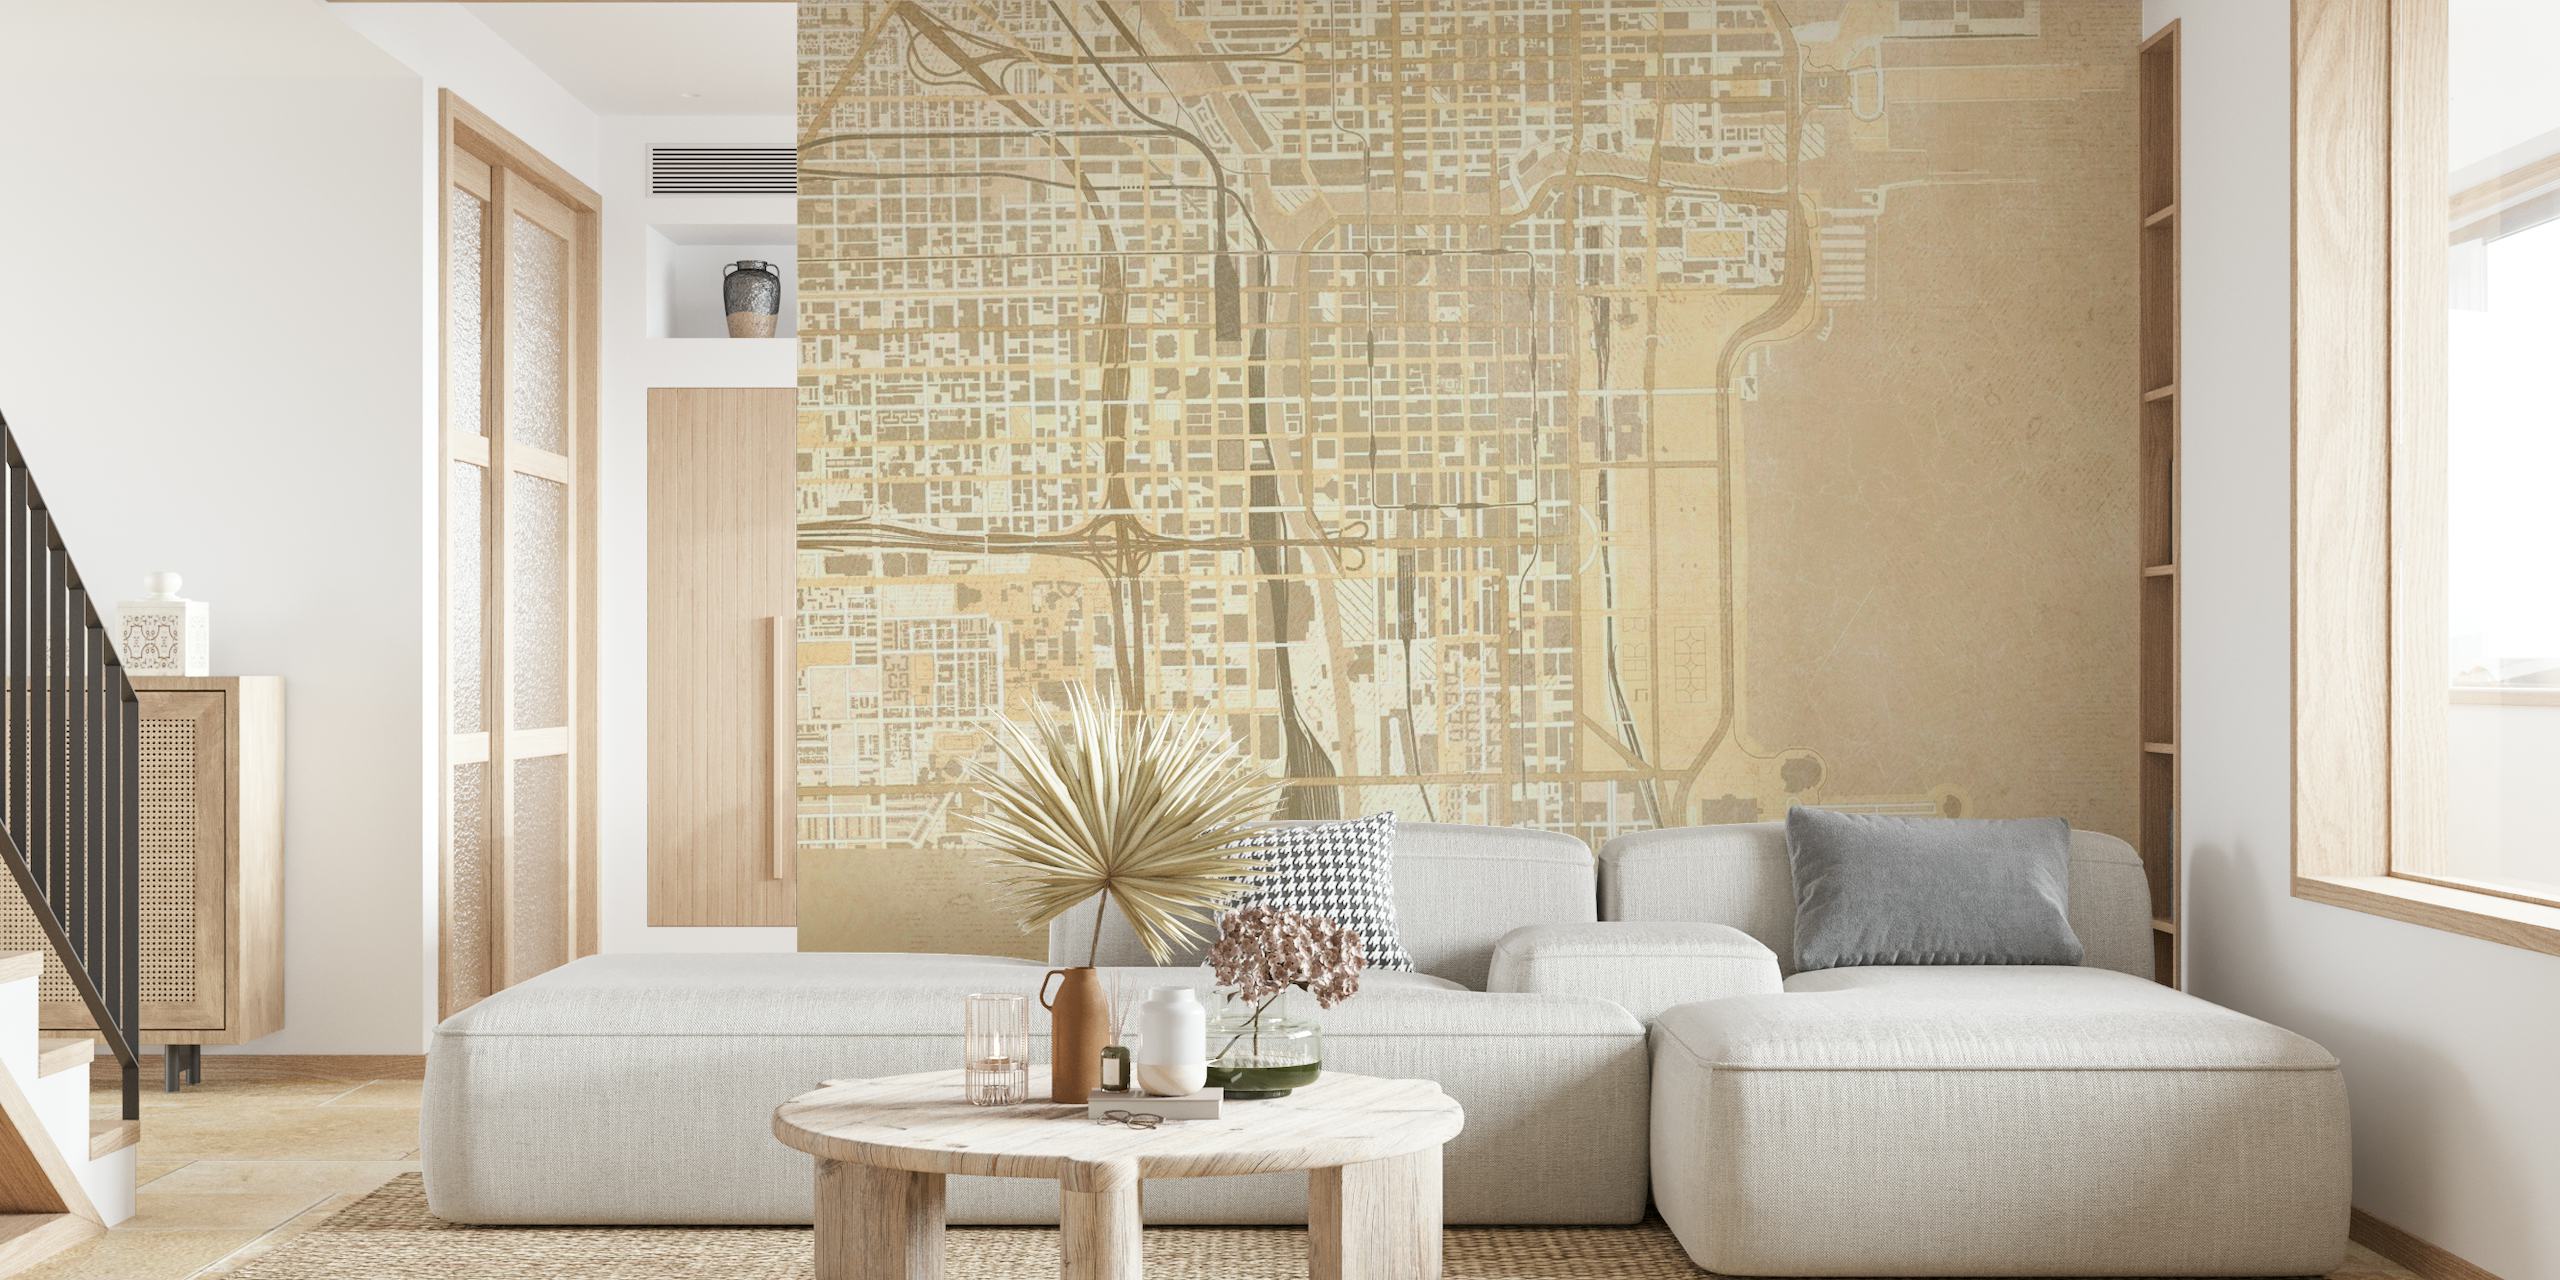 Intricately designed Vintage Chicago Map Wallpaper in sepia tones